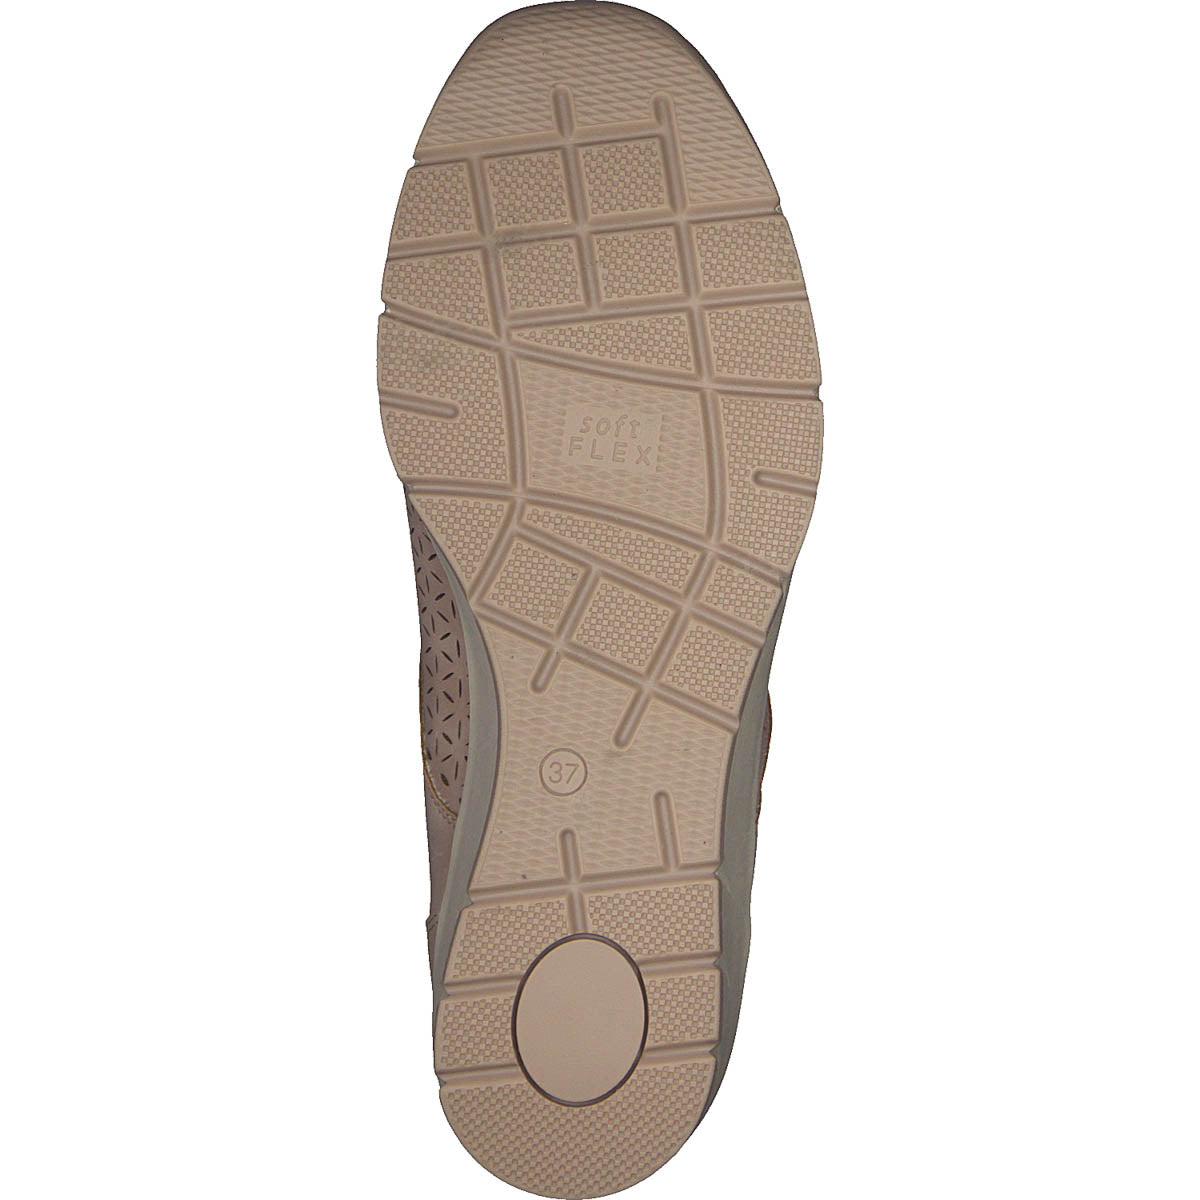 Bottom view of the beige sole with a gentle wedge.